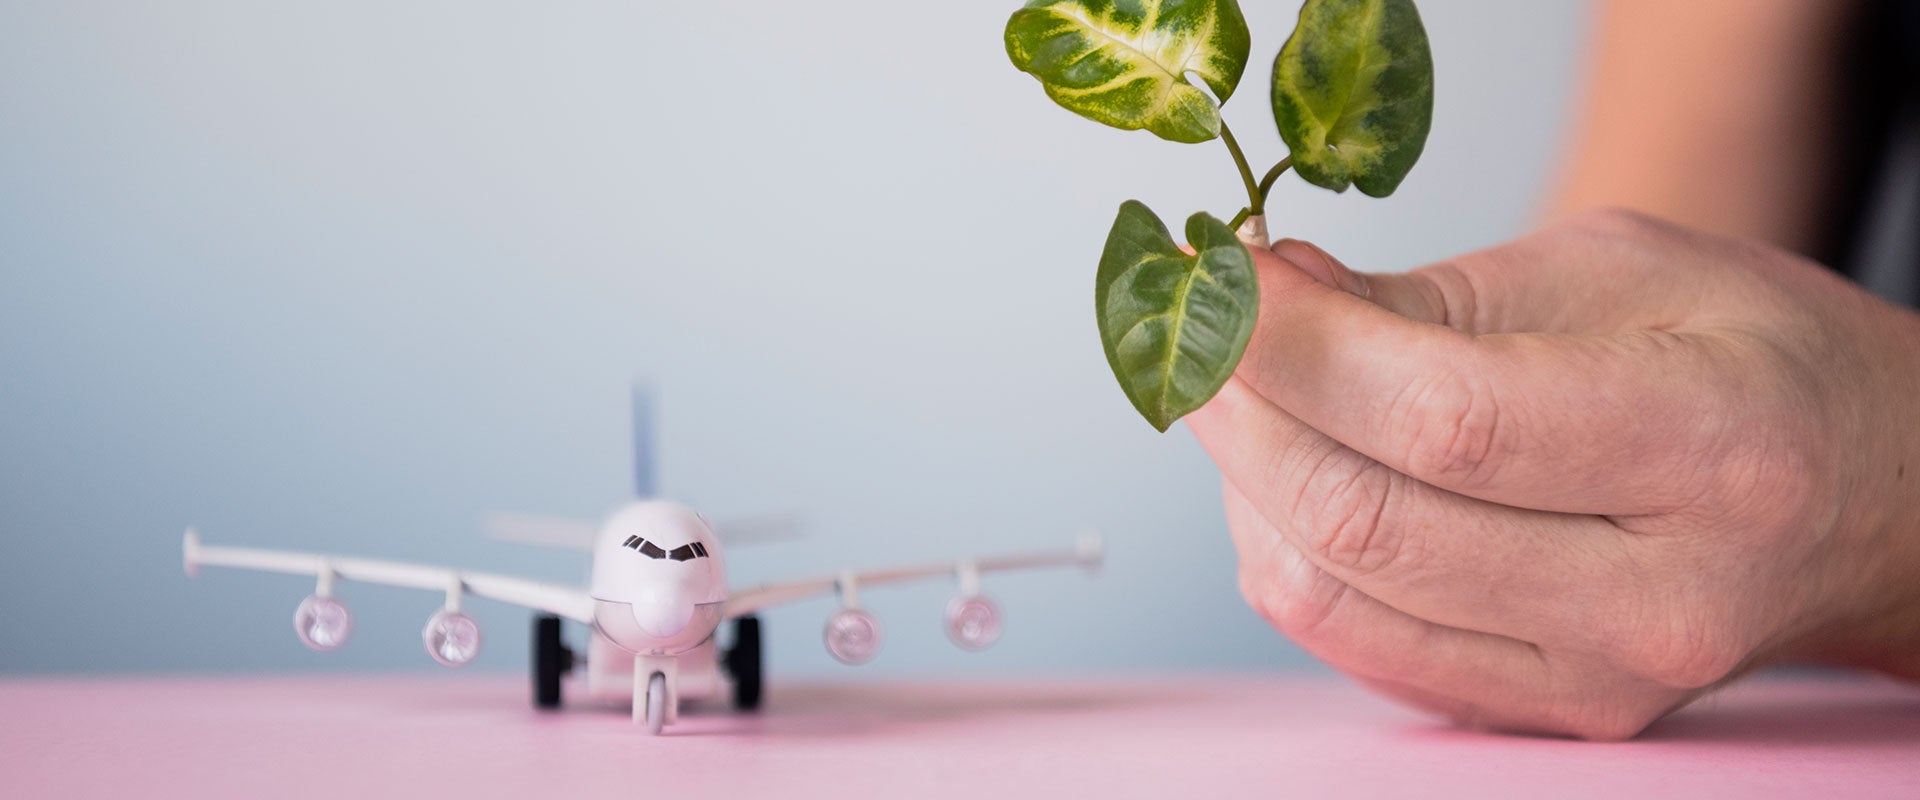 model airplane next to hand holding plant